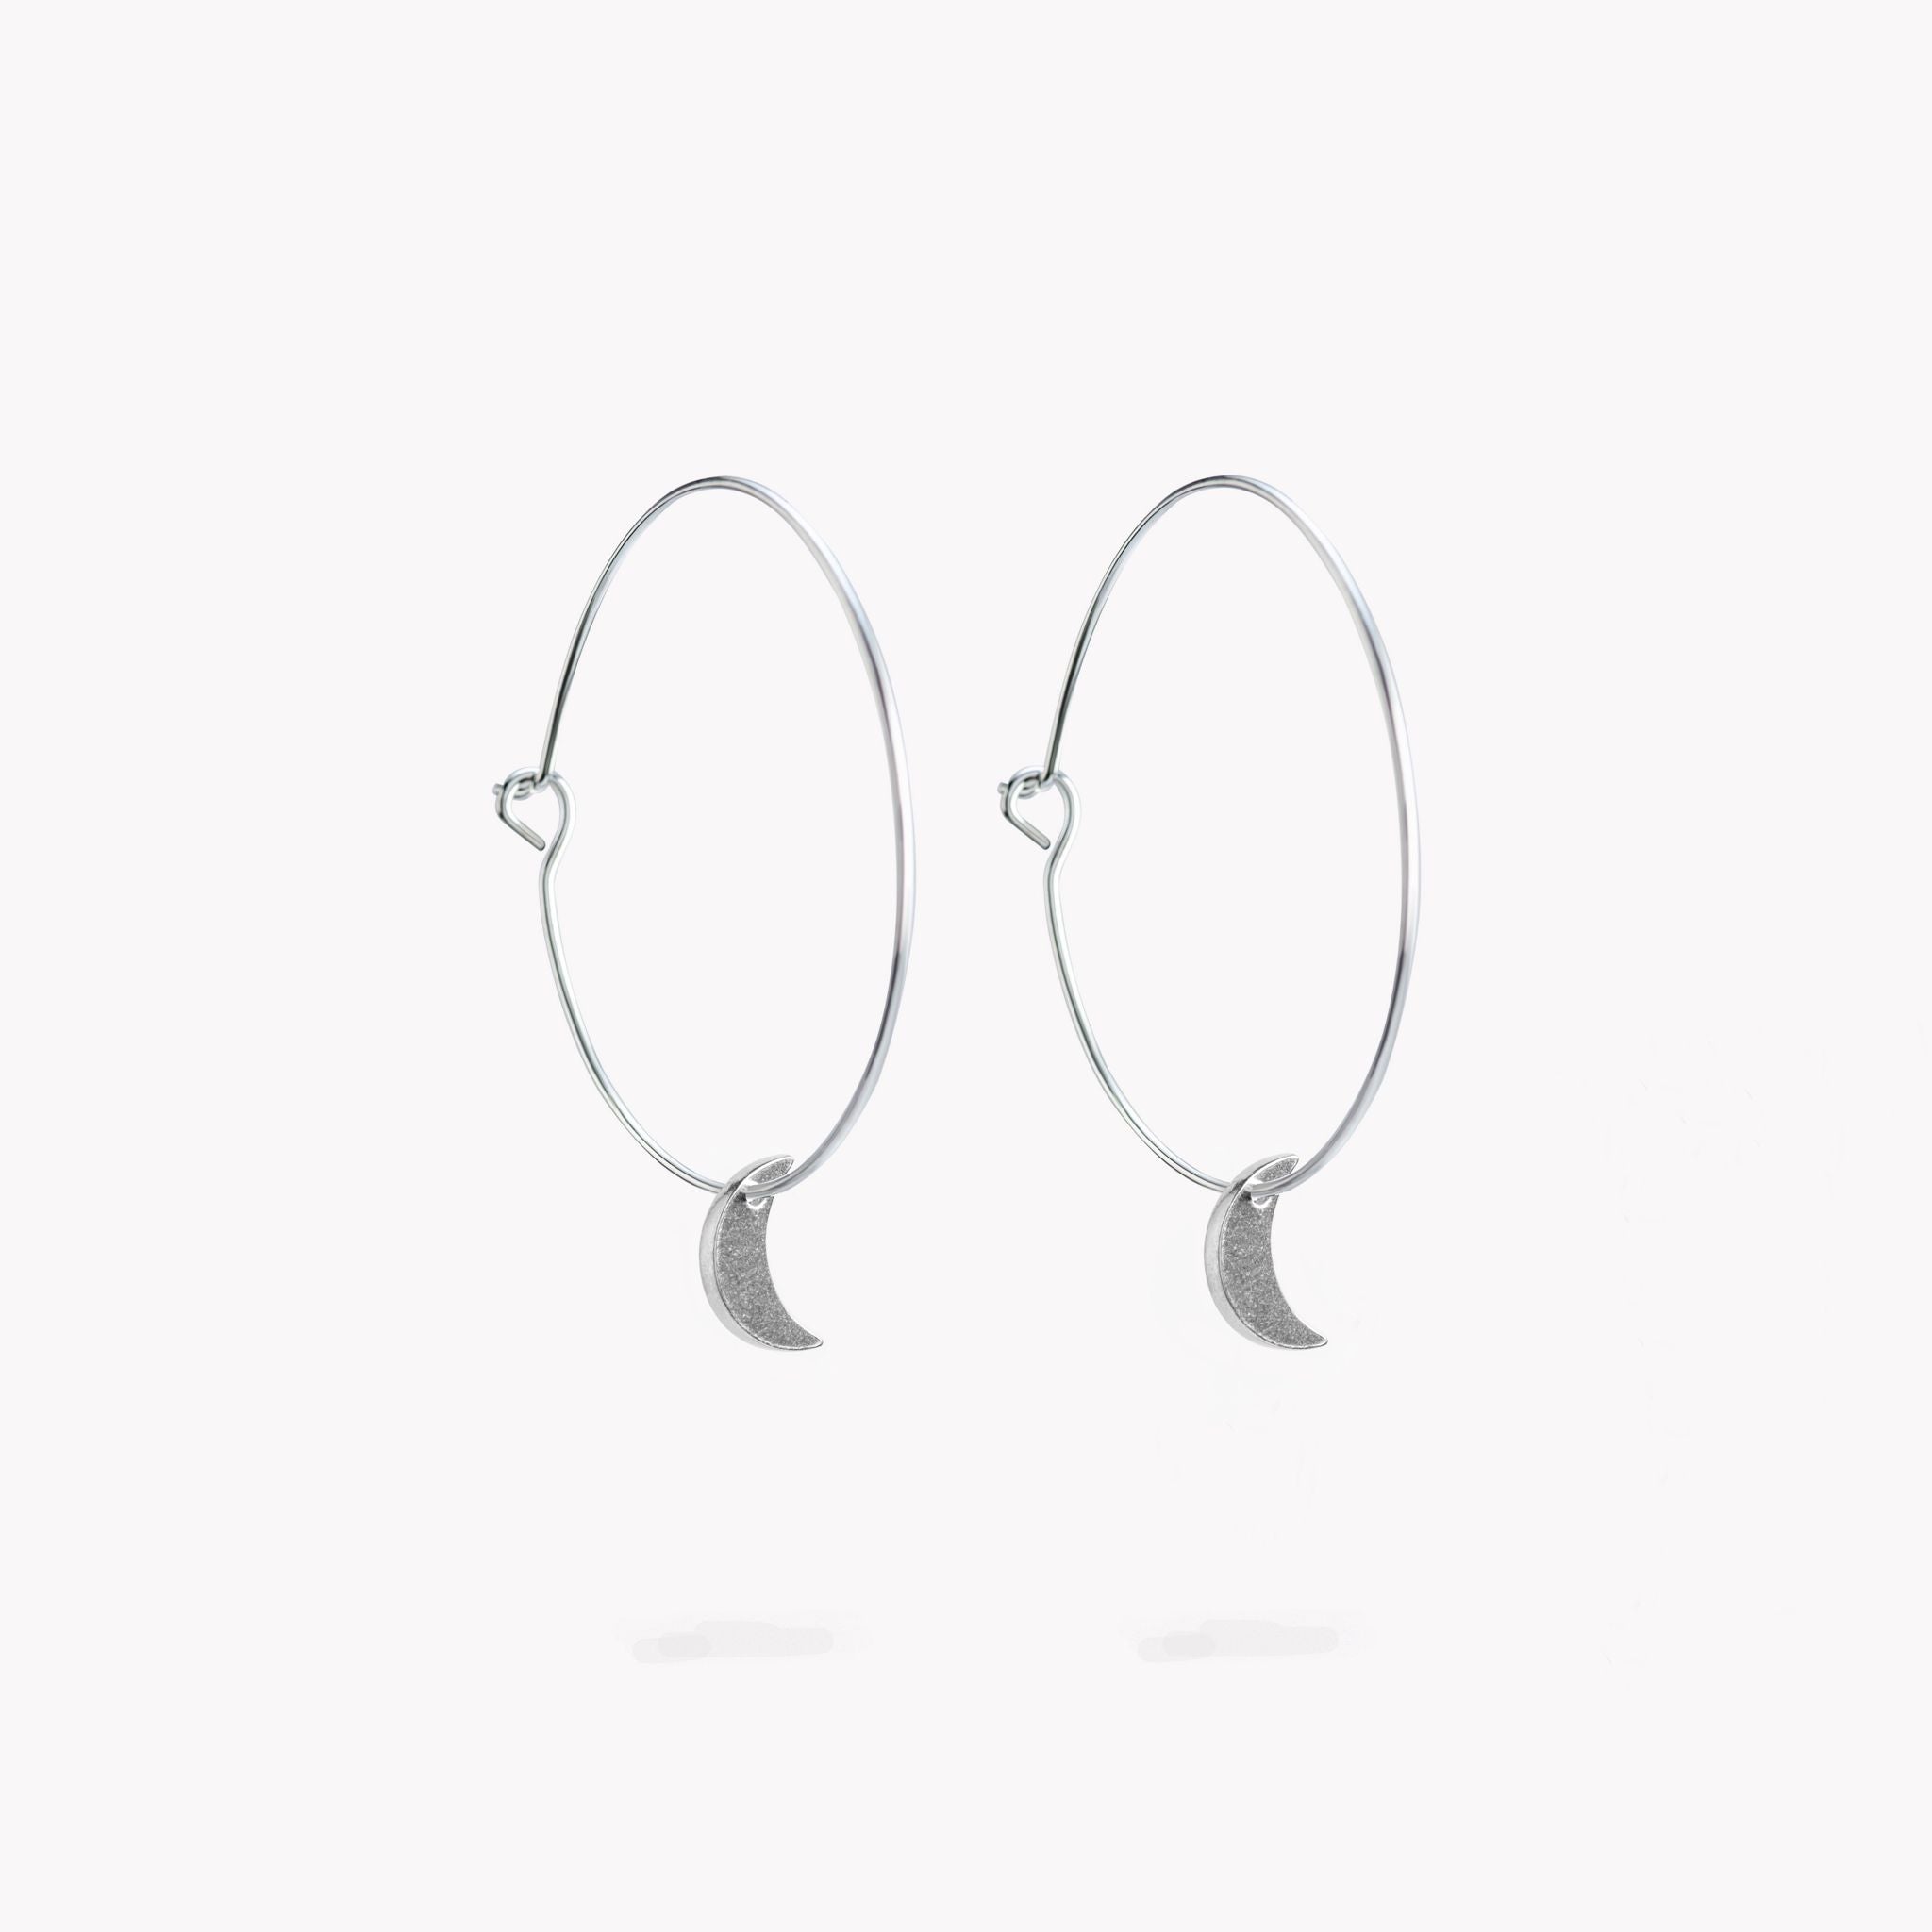 An elegant pair of pewter hoop earrings with a simple crescent moon design.